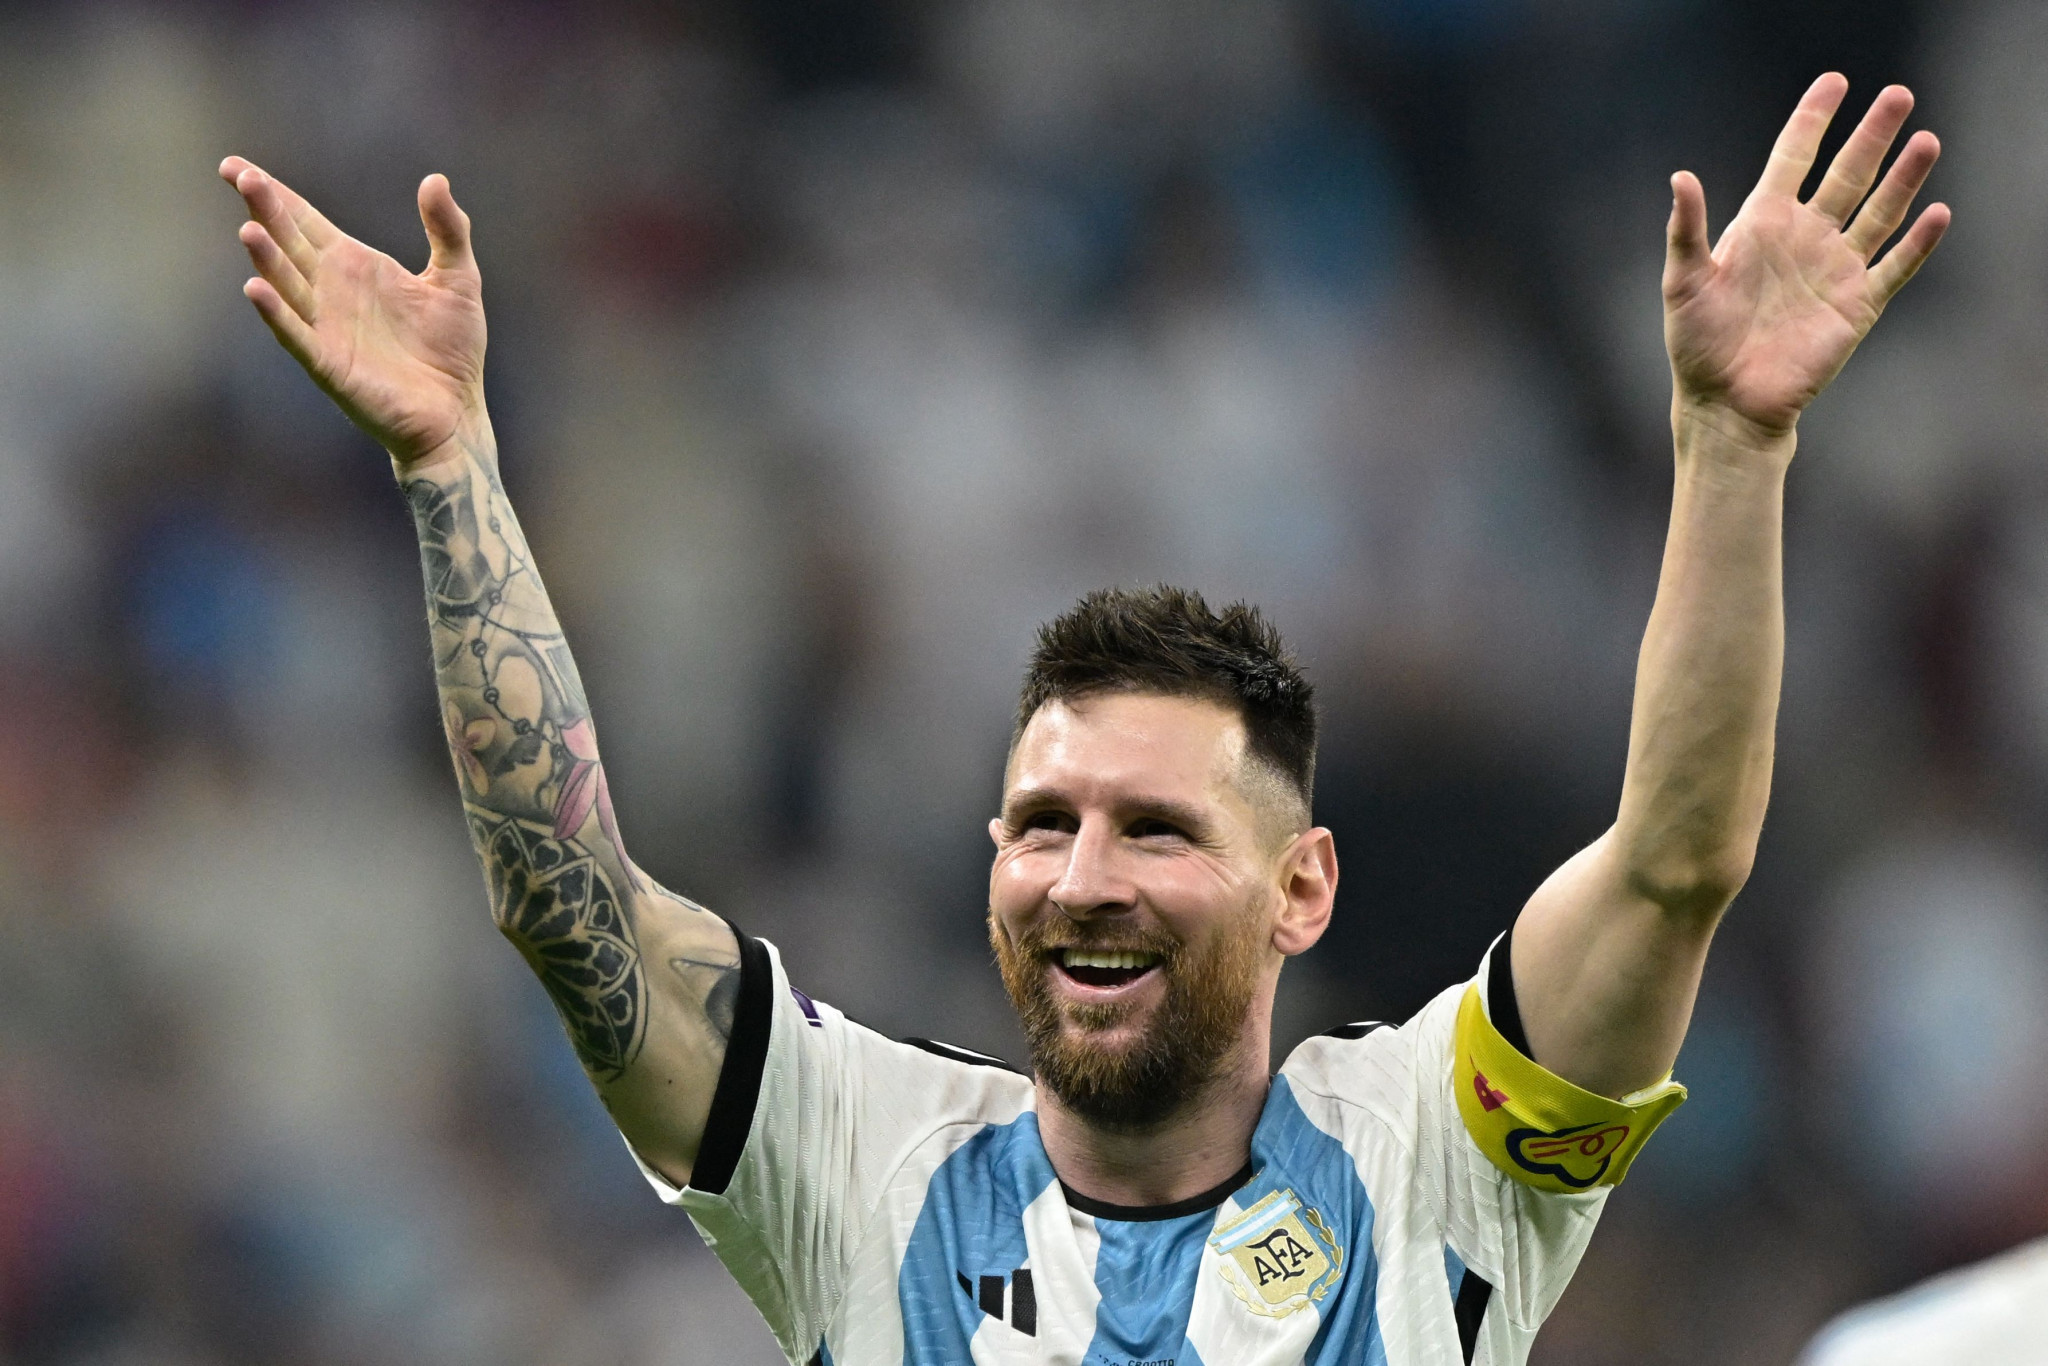 Lionel Messi salutes the crowd after Argentina's win, which saw him score a penalty and assist the third goal ©Getty Images